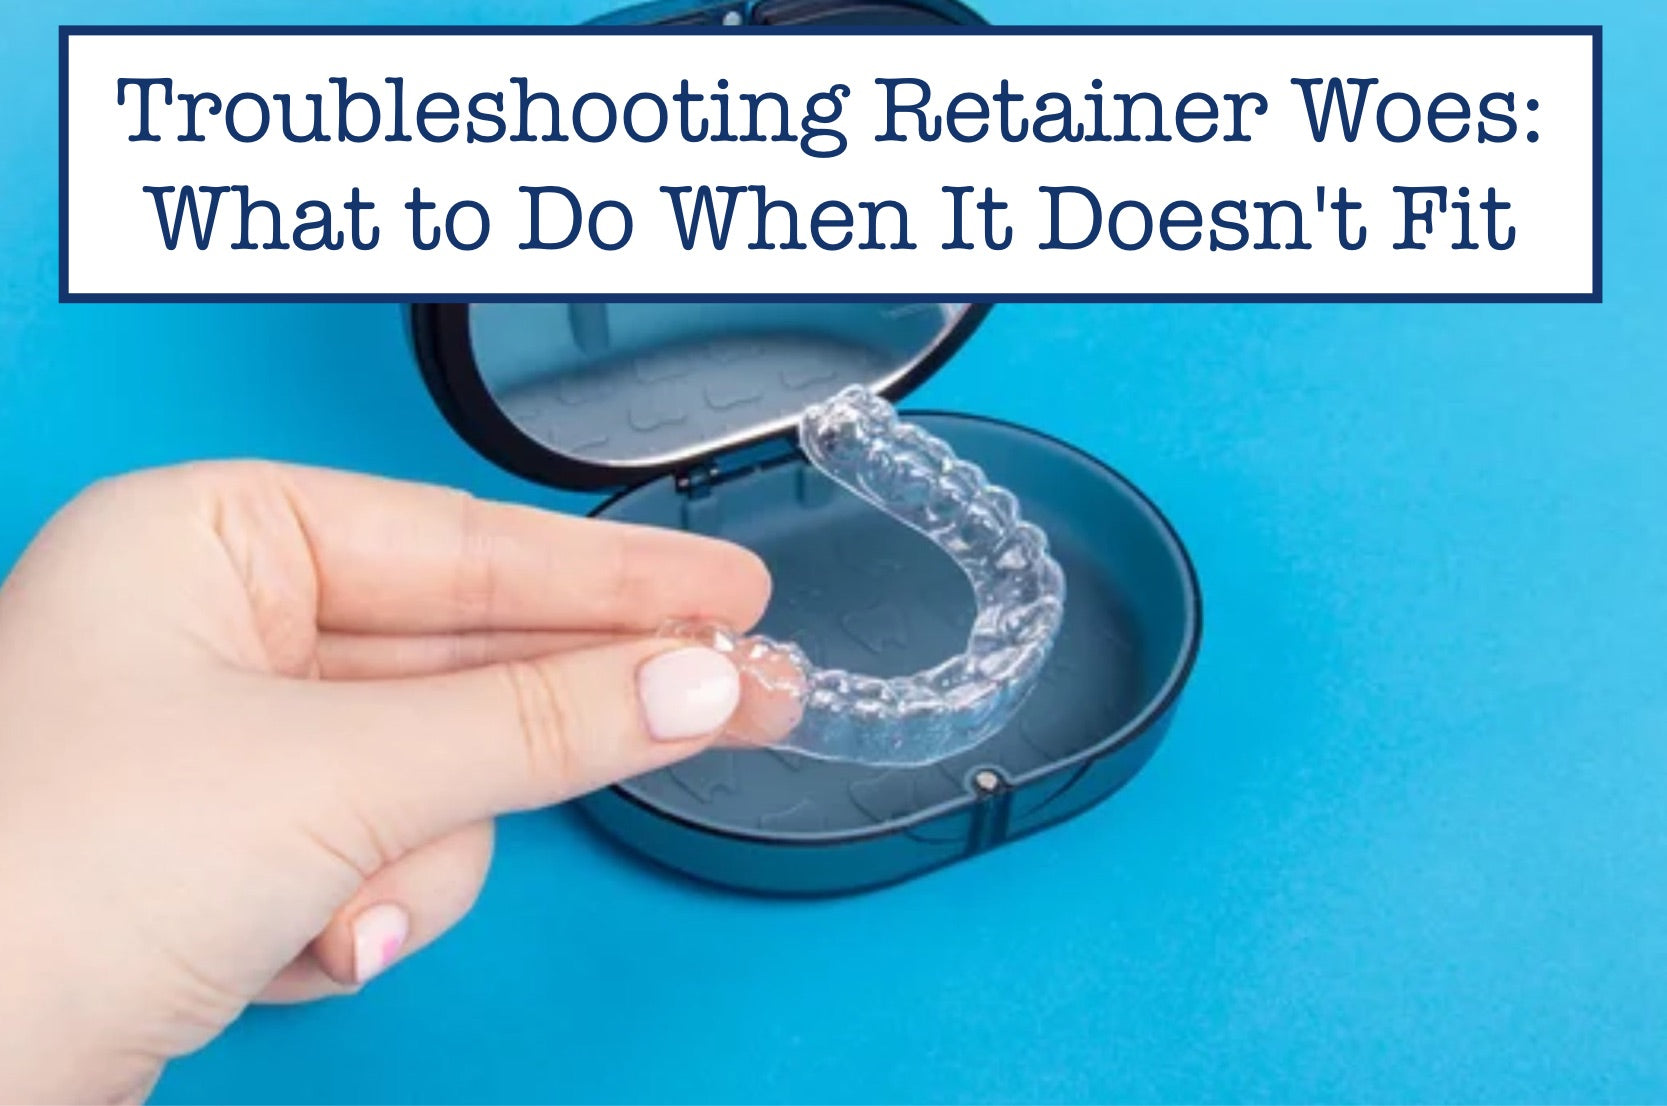 Troubleshooting Retainer Woes: What to Do When It Doesn't Fit